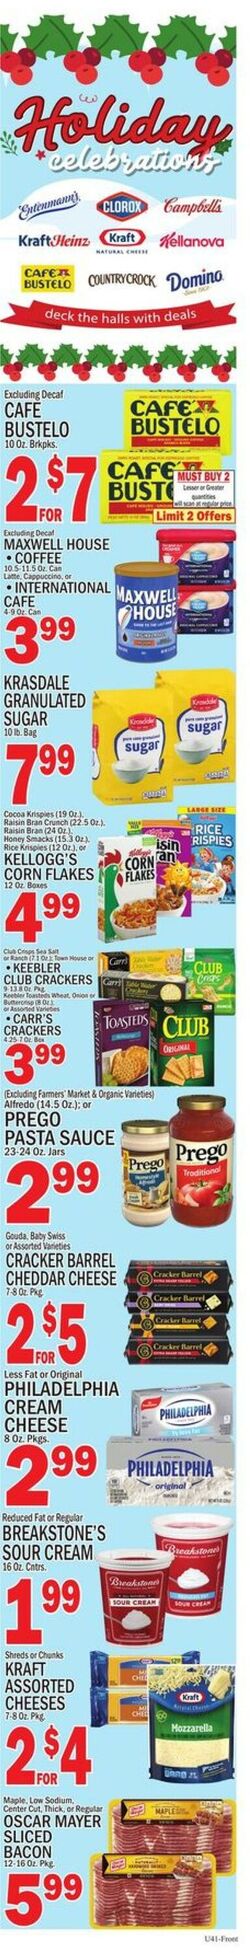 Weekly ad CTown 03/24/2023 - 03/30/2023